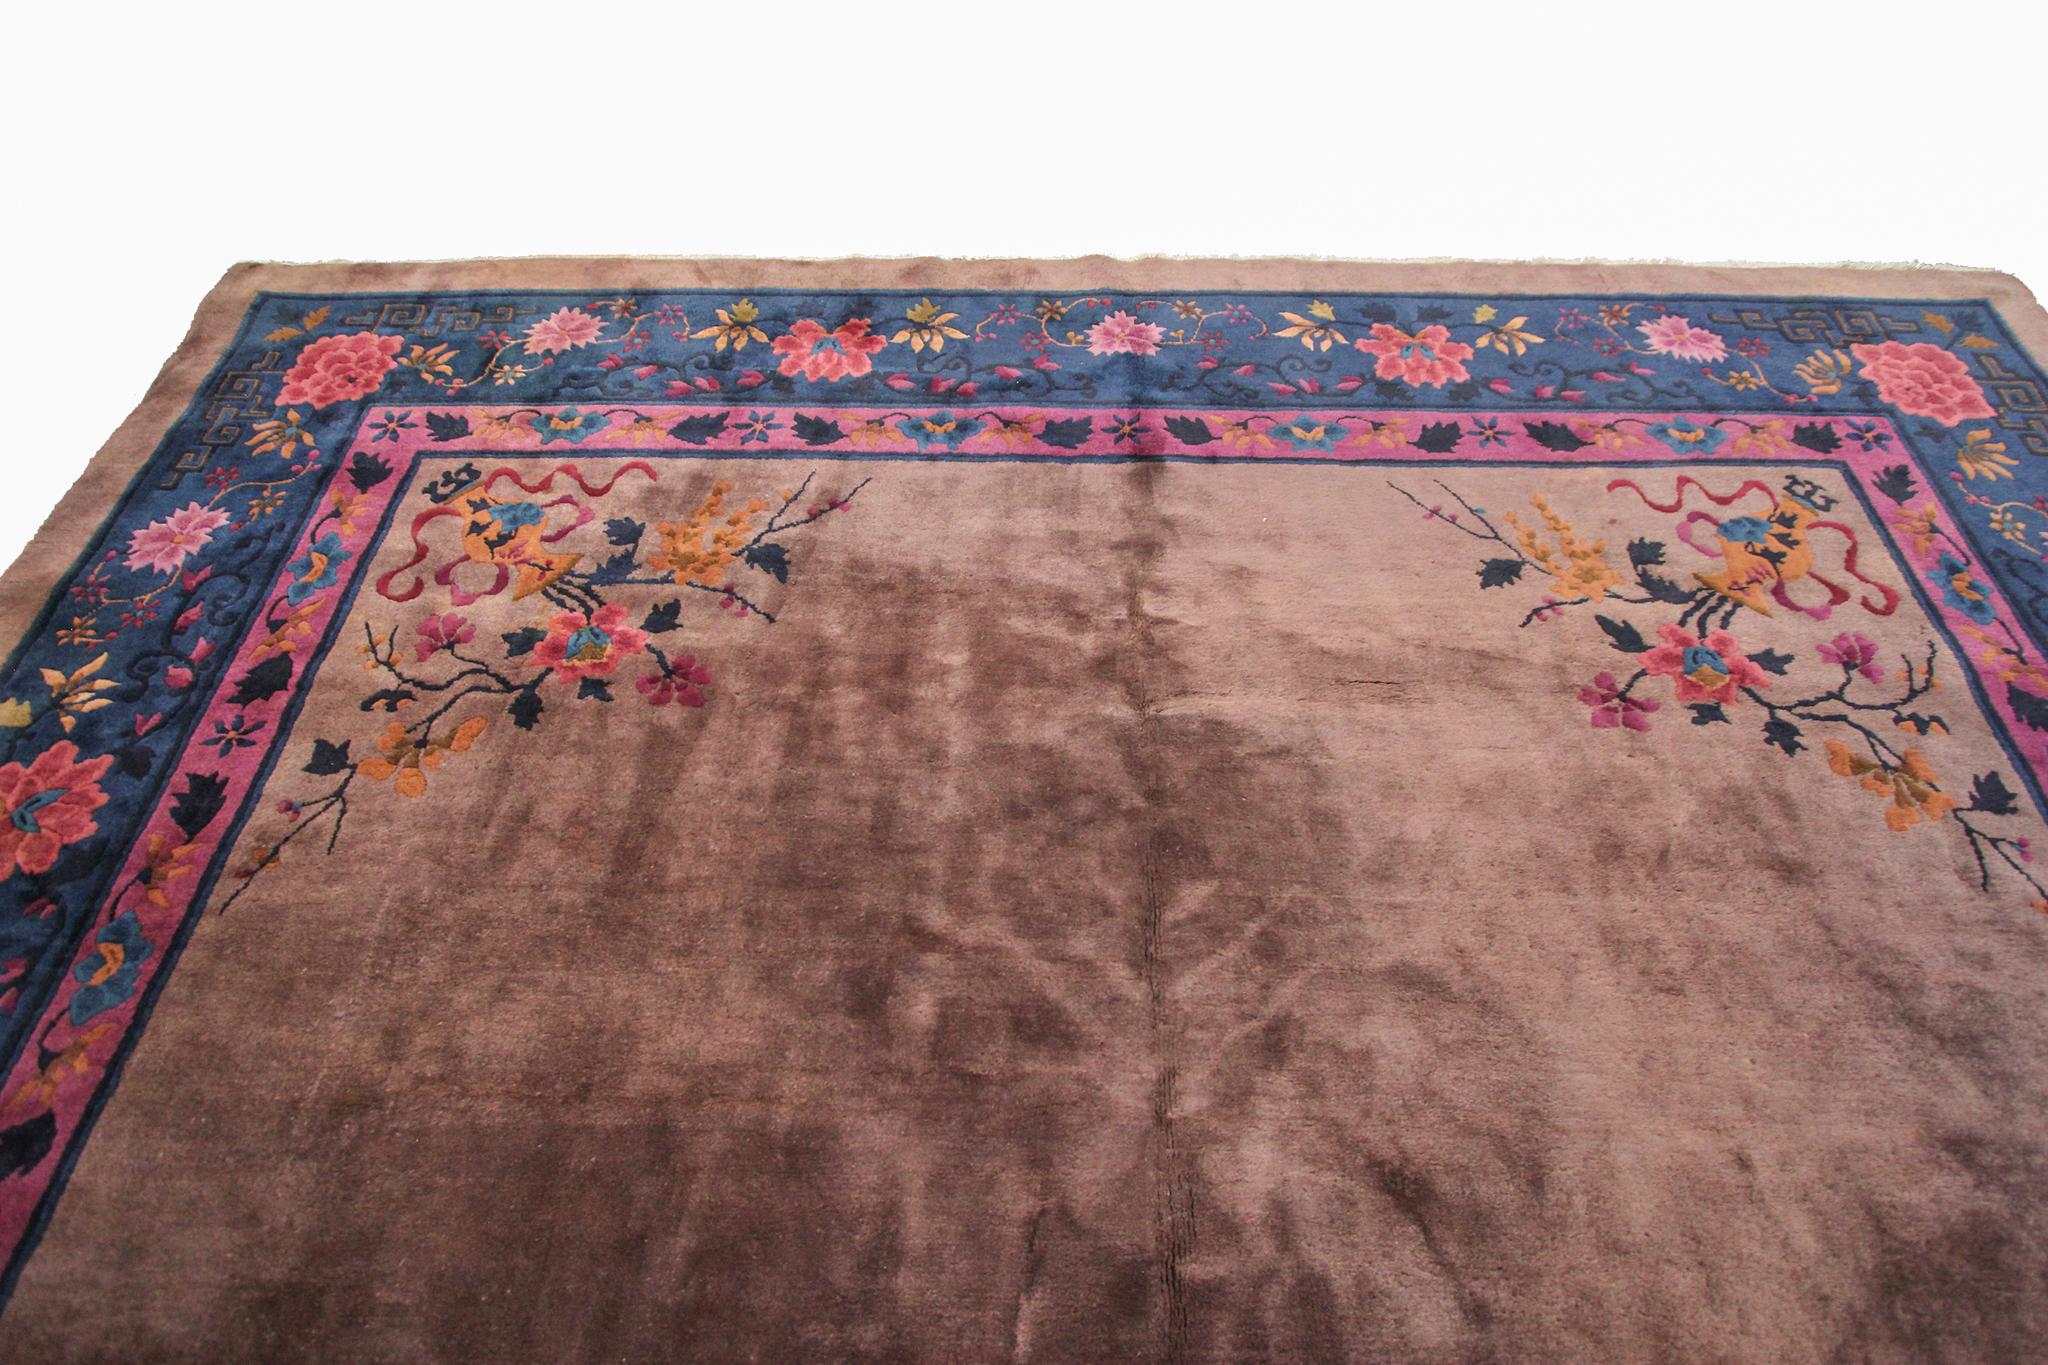 Hand-Knotted Antique Art Deco Rug Antique Chinese Walter Nichols Rug 1920 9x12 275cm x 361cm  For Sale